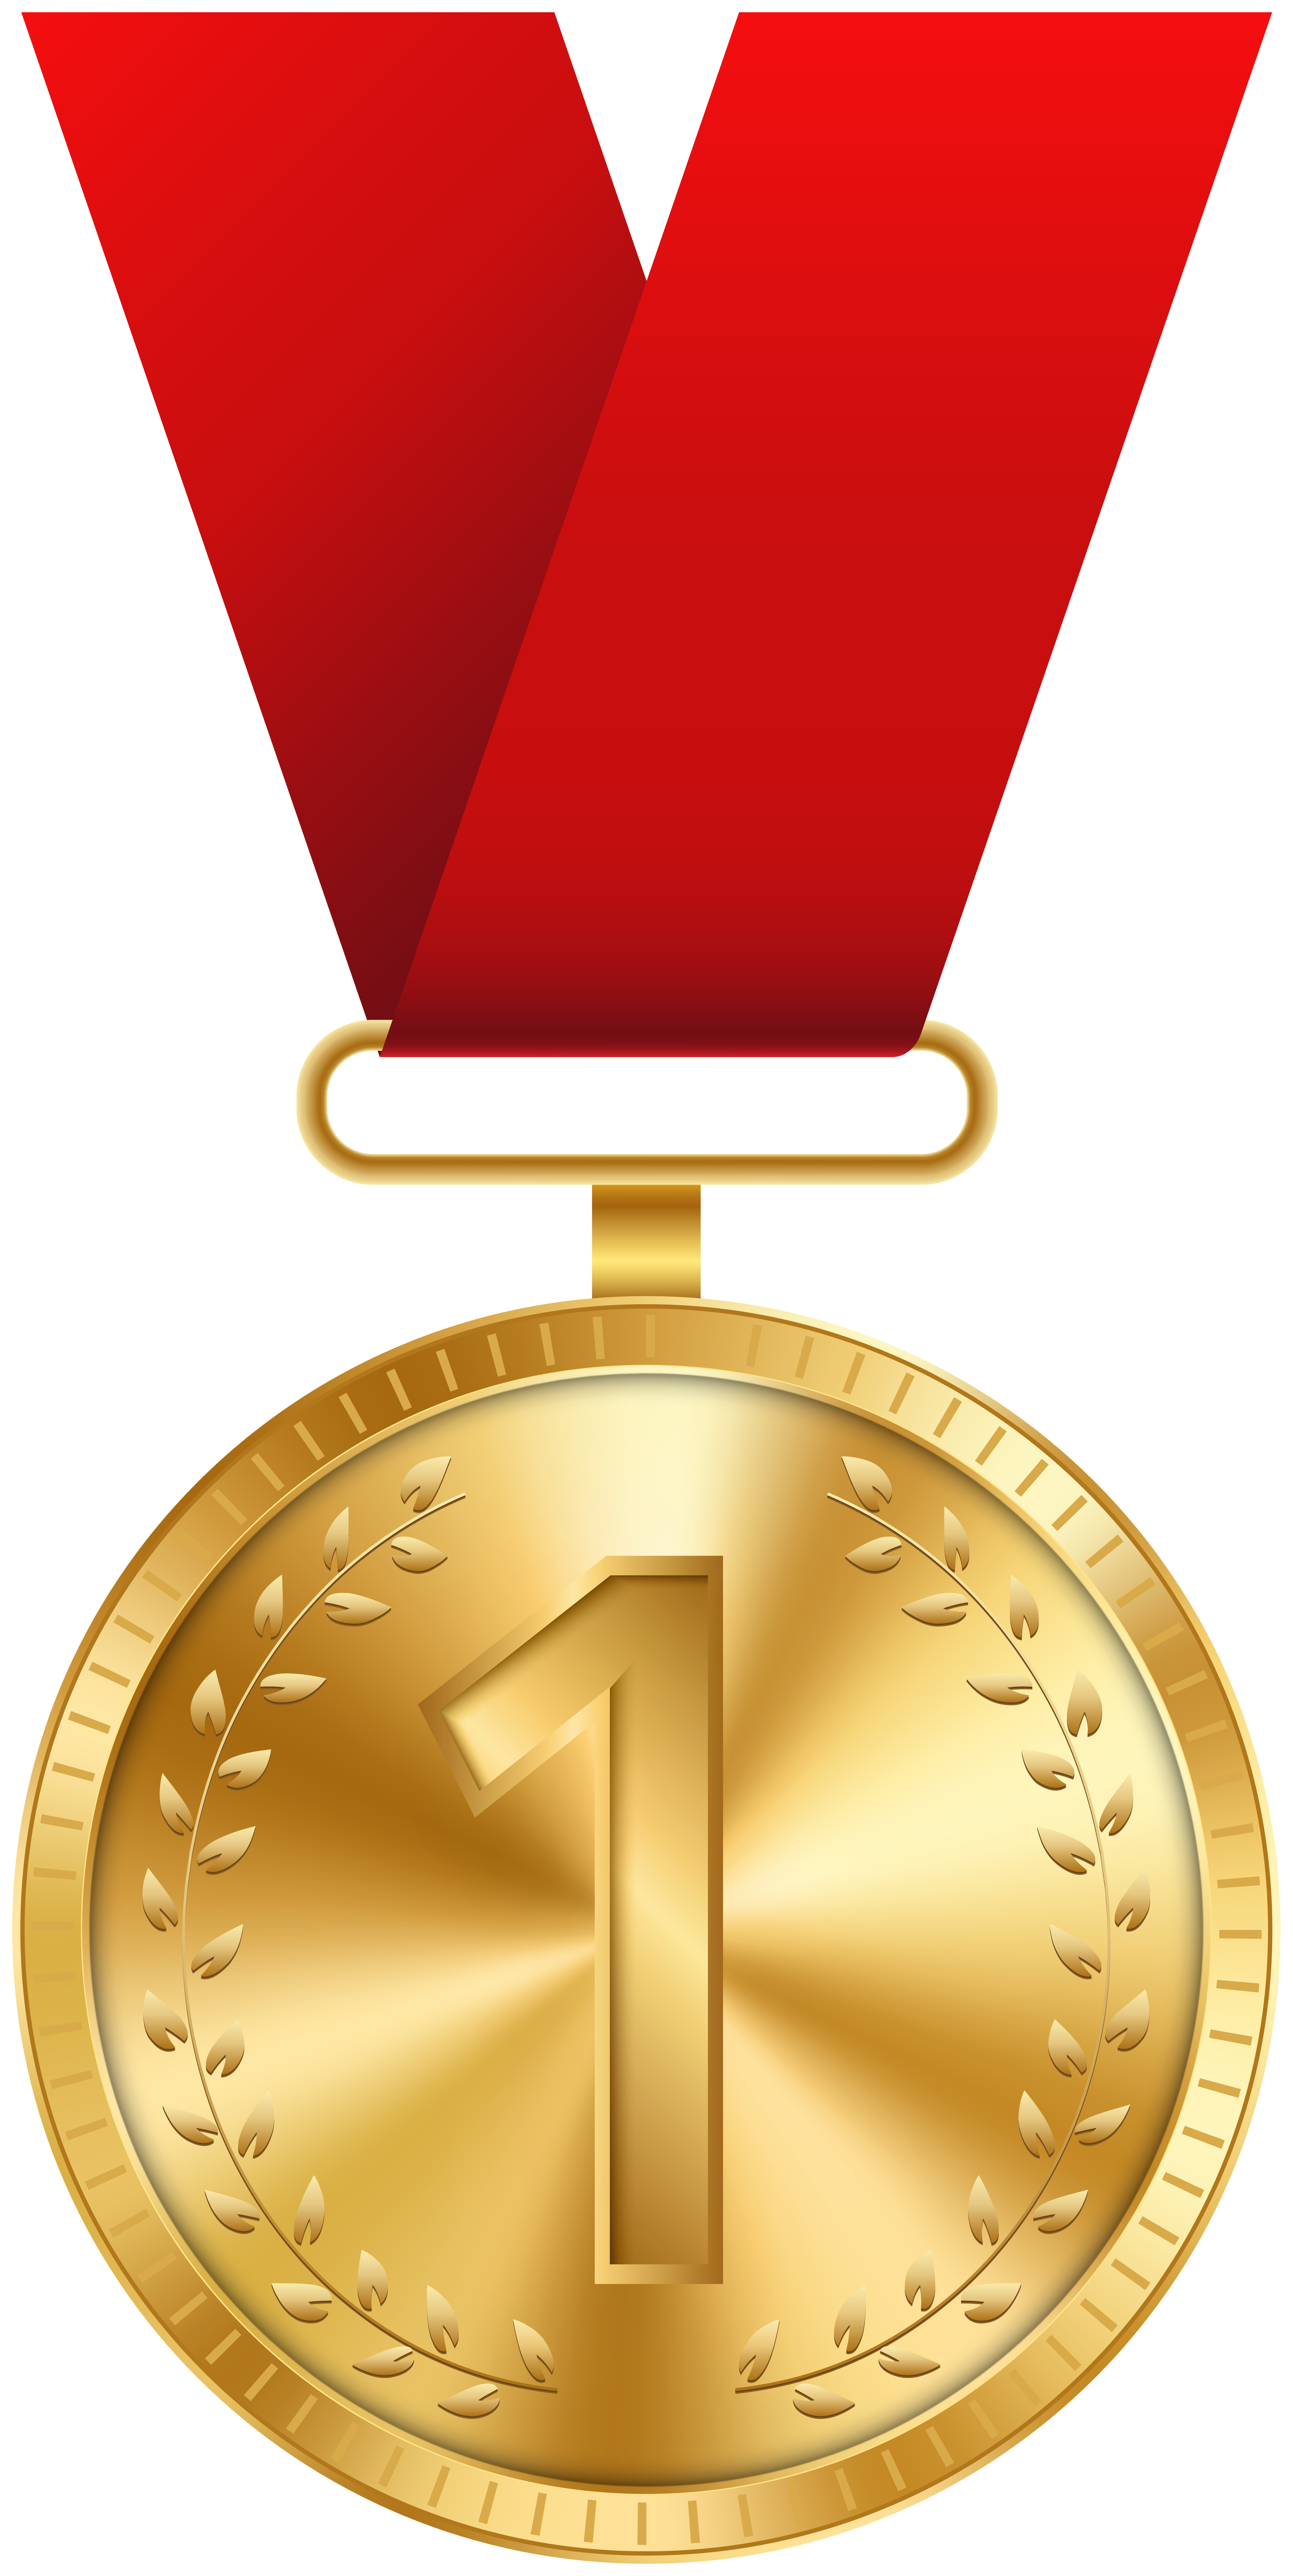 Gold Medal PNG Clip Art Image | Gallery Yopriceville - High-Quality